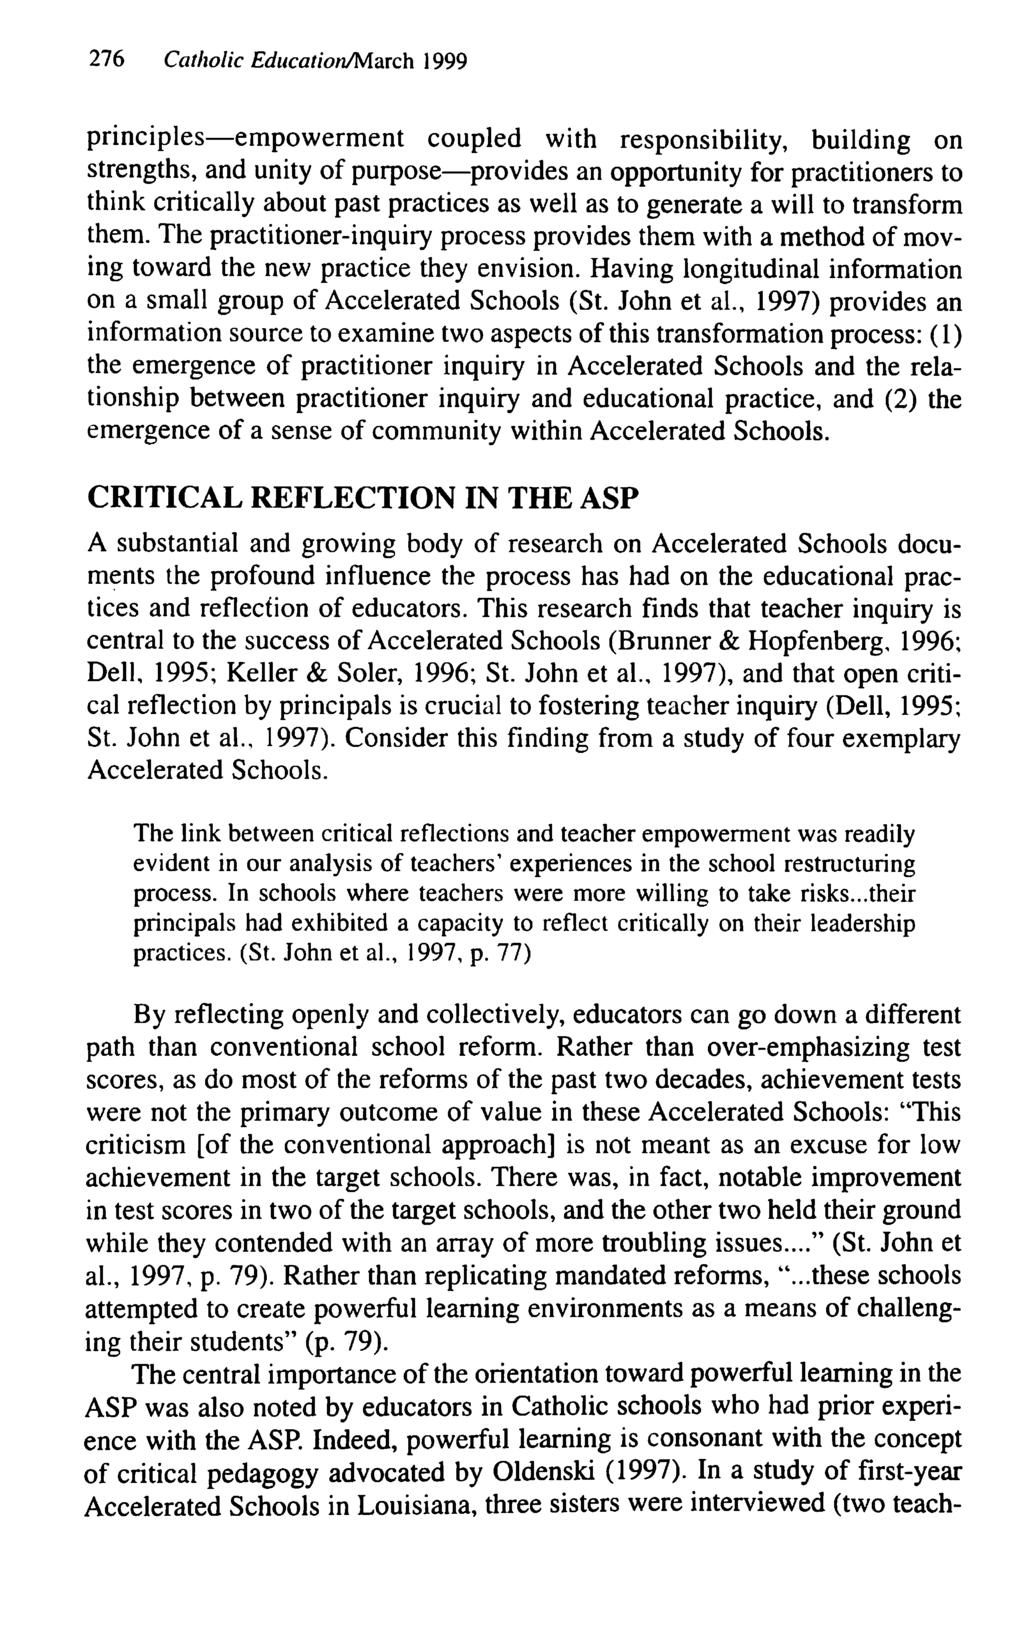 276 Catholic Education/March 1999 principles empowerment coupled with responsibility, building on strengths, and unity of purpose provides an opportunity for practitioners to think critically about